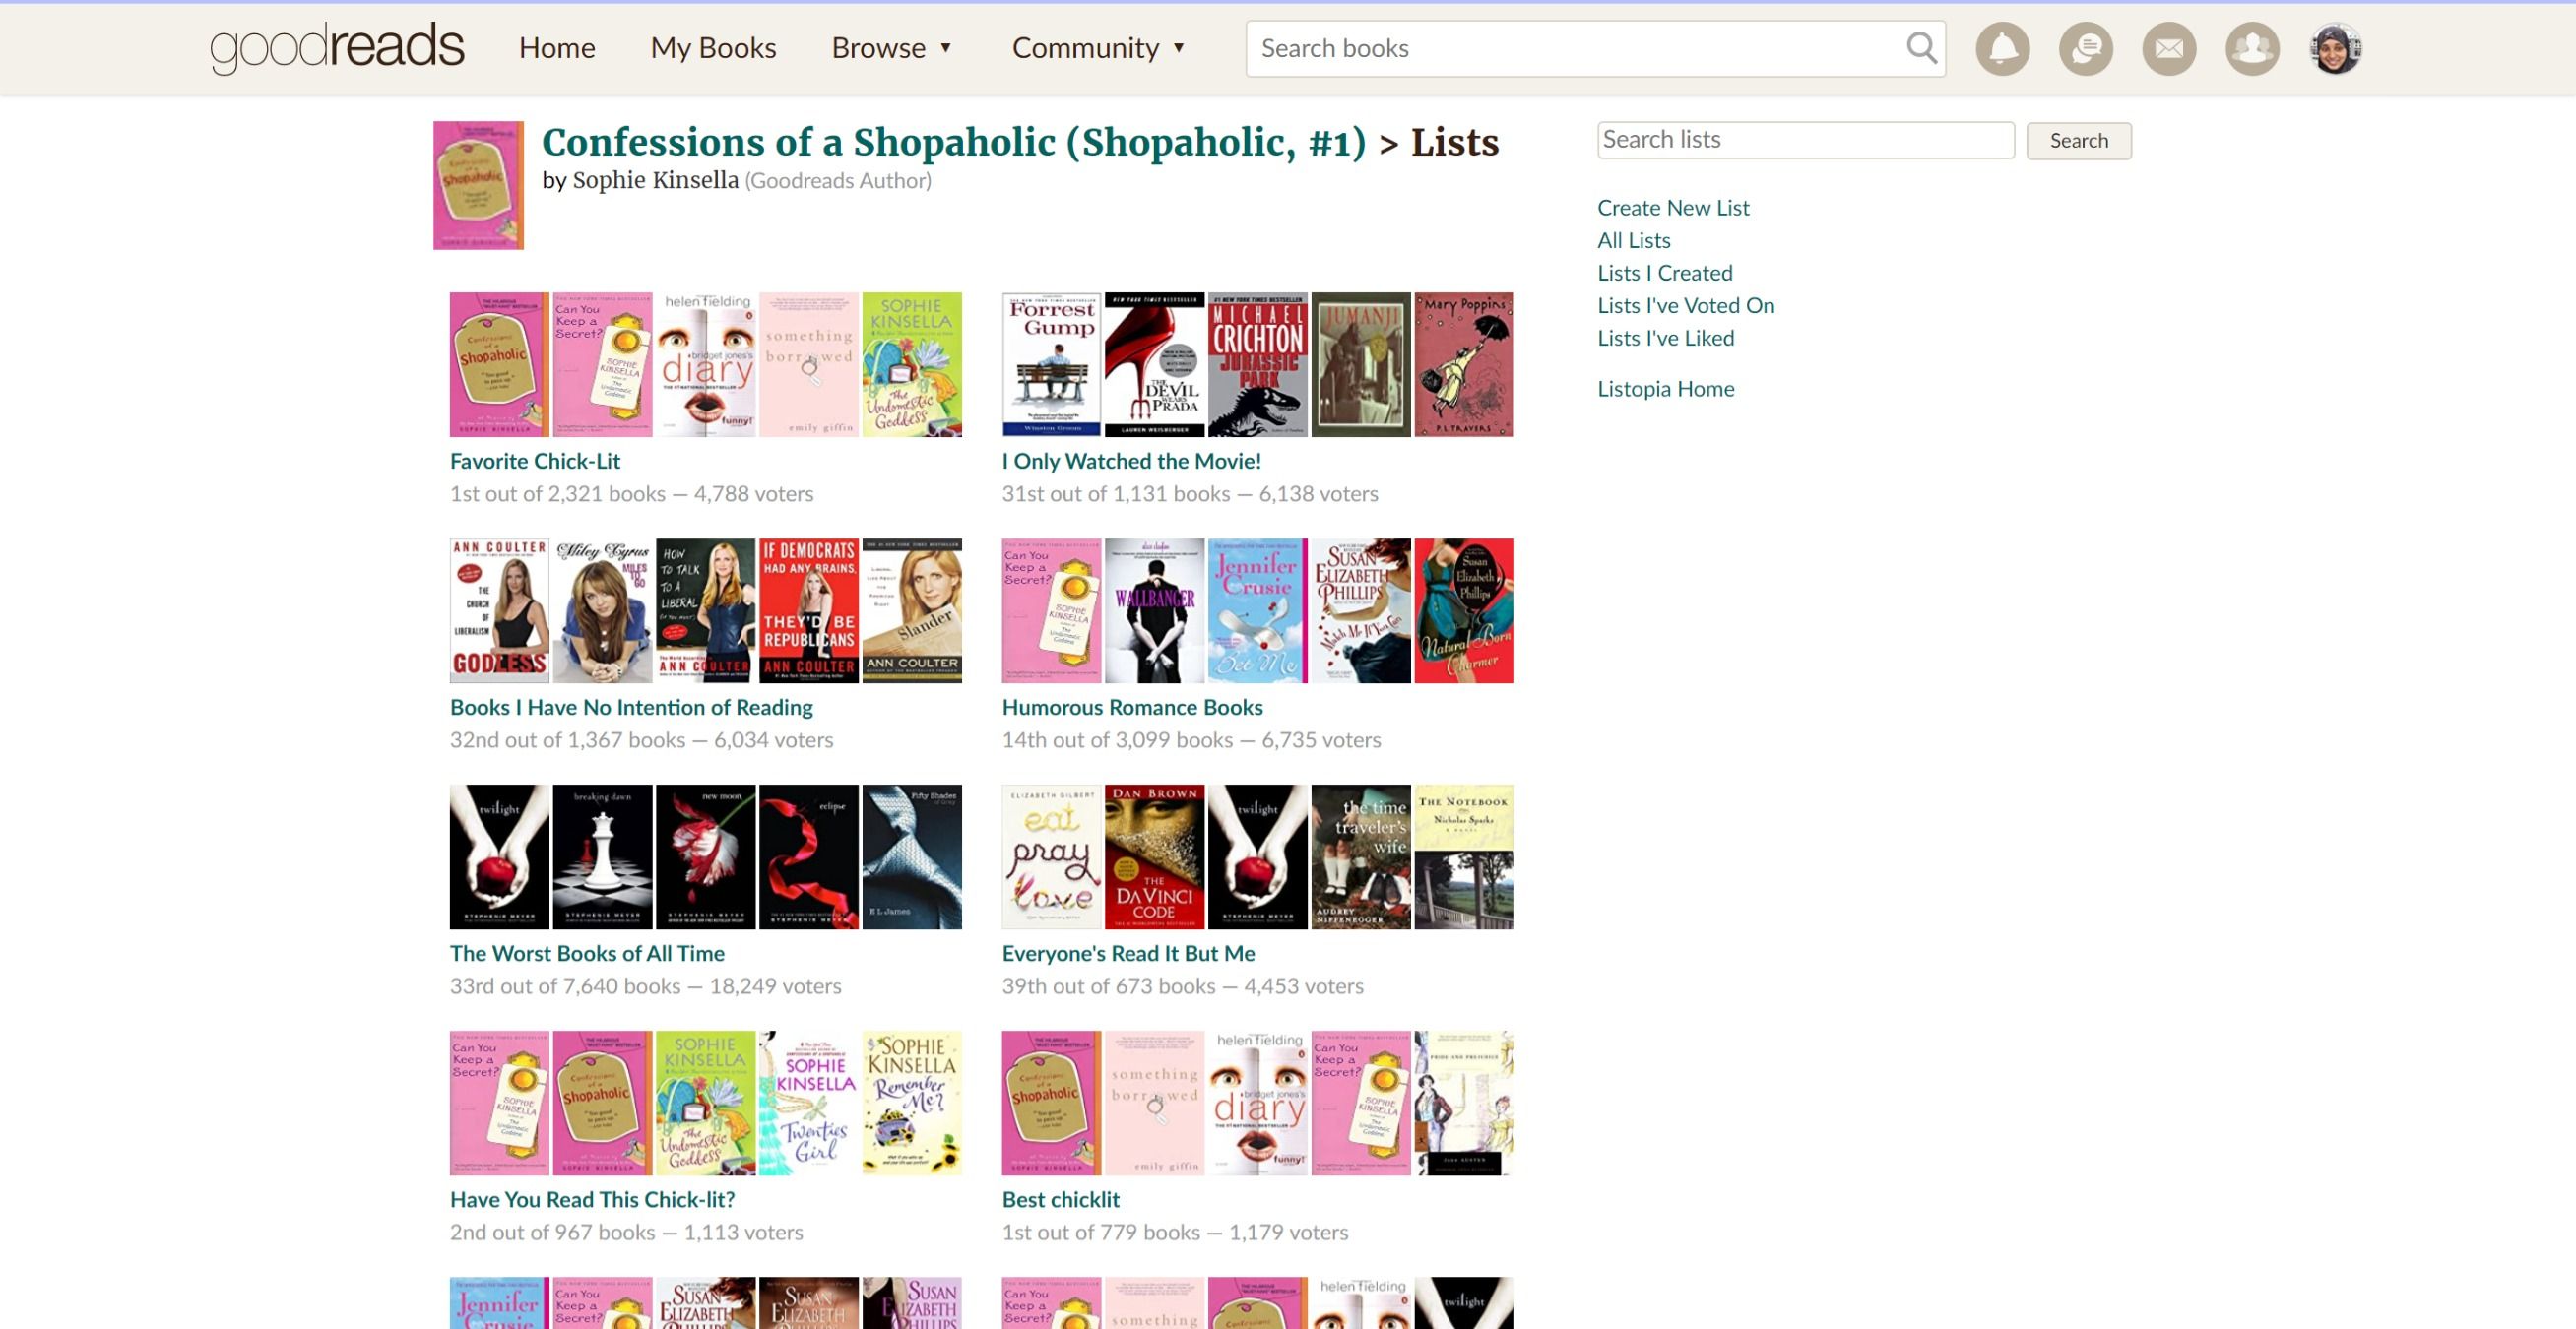 Page showing all the Goodreads lists of 'Confessions of a Shopaholic' by Sophie Kinsella